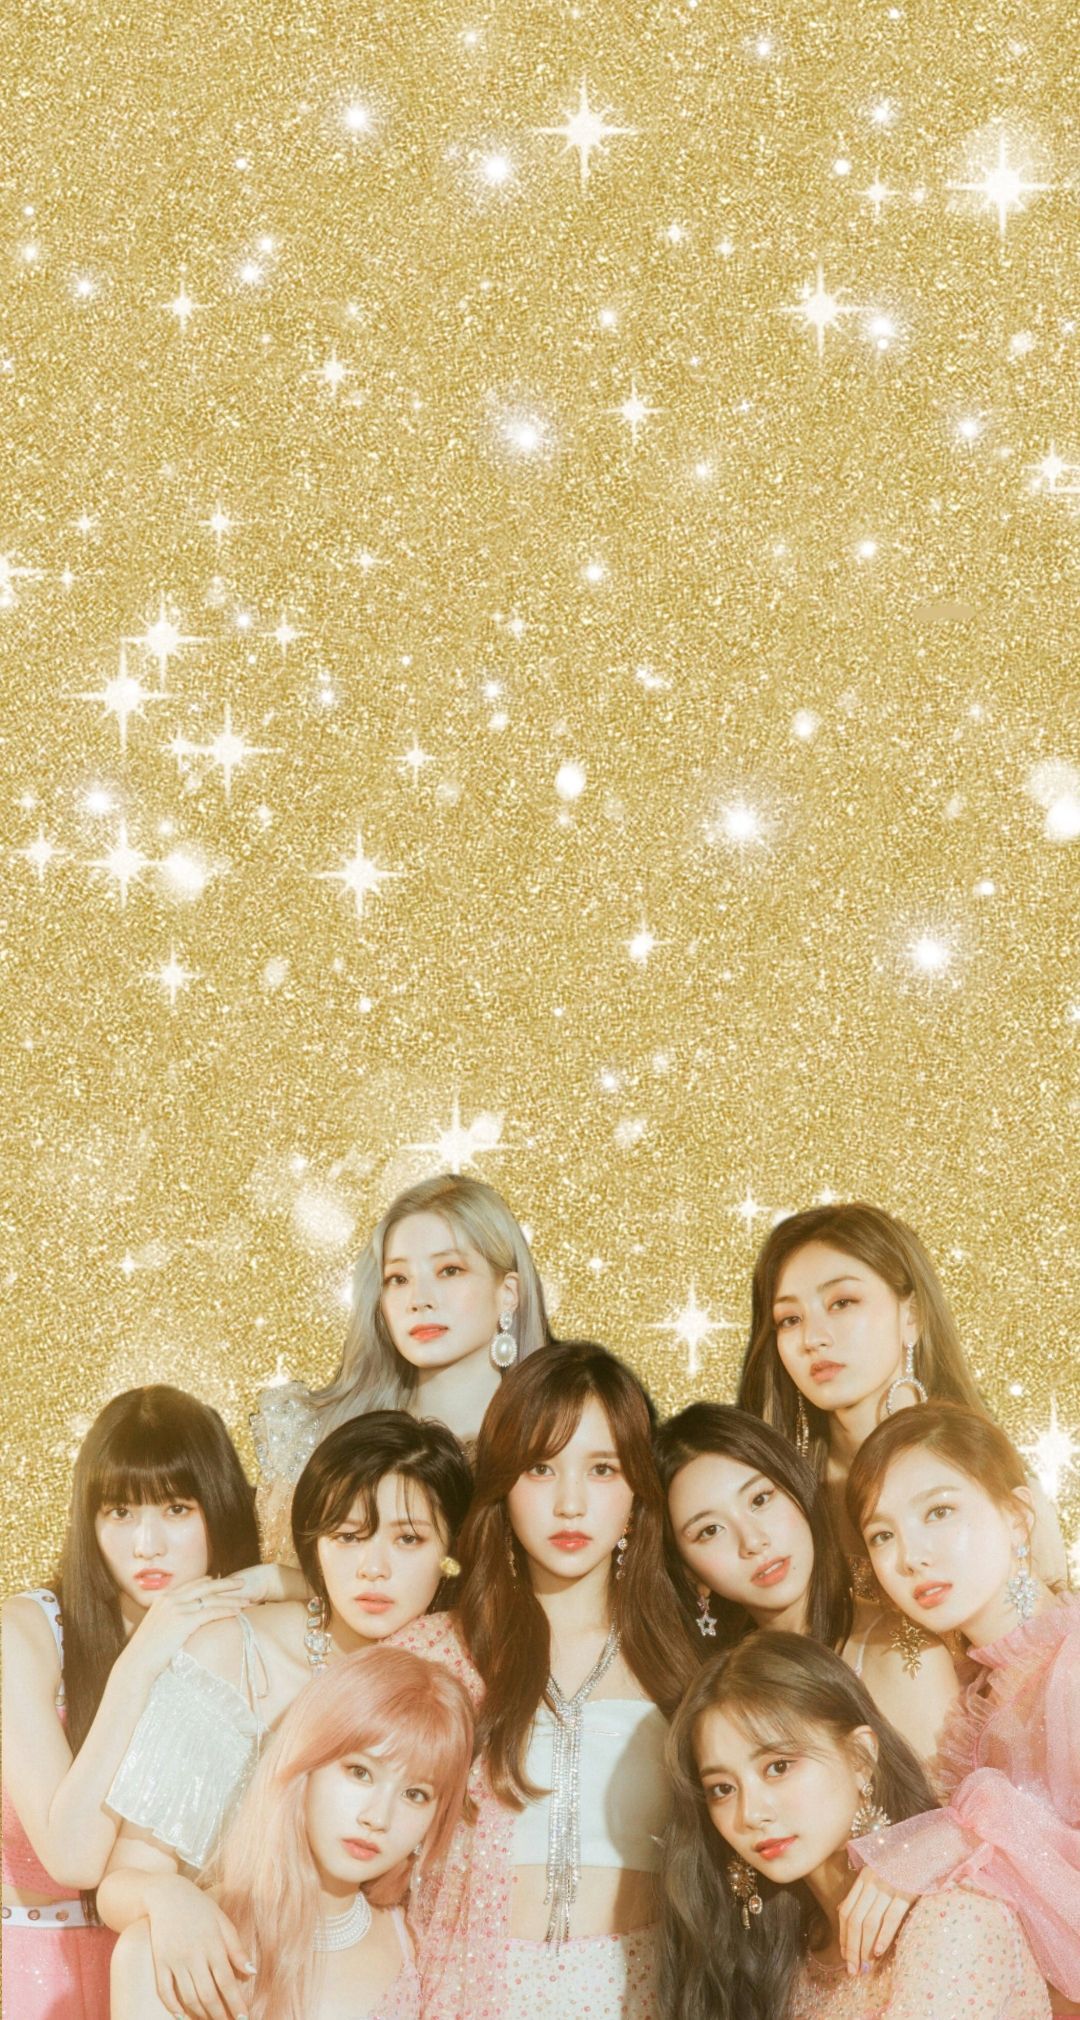 Twice More And More Wallpapers 